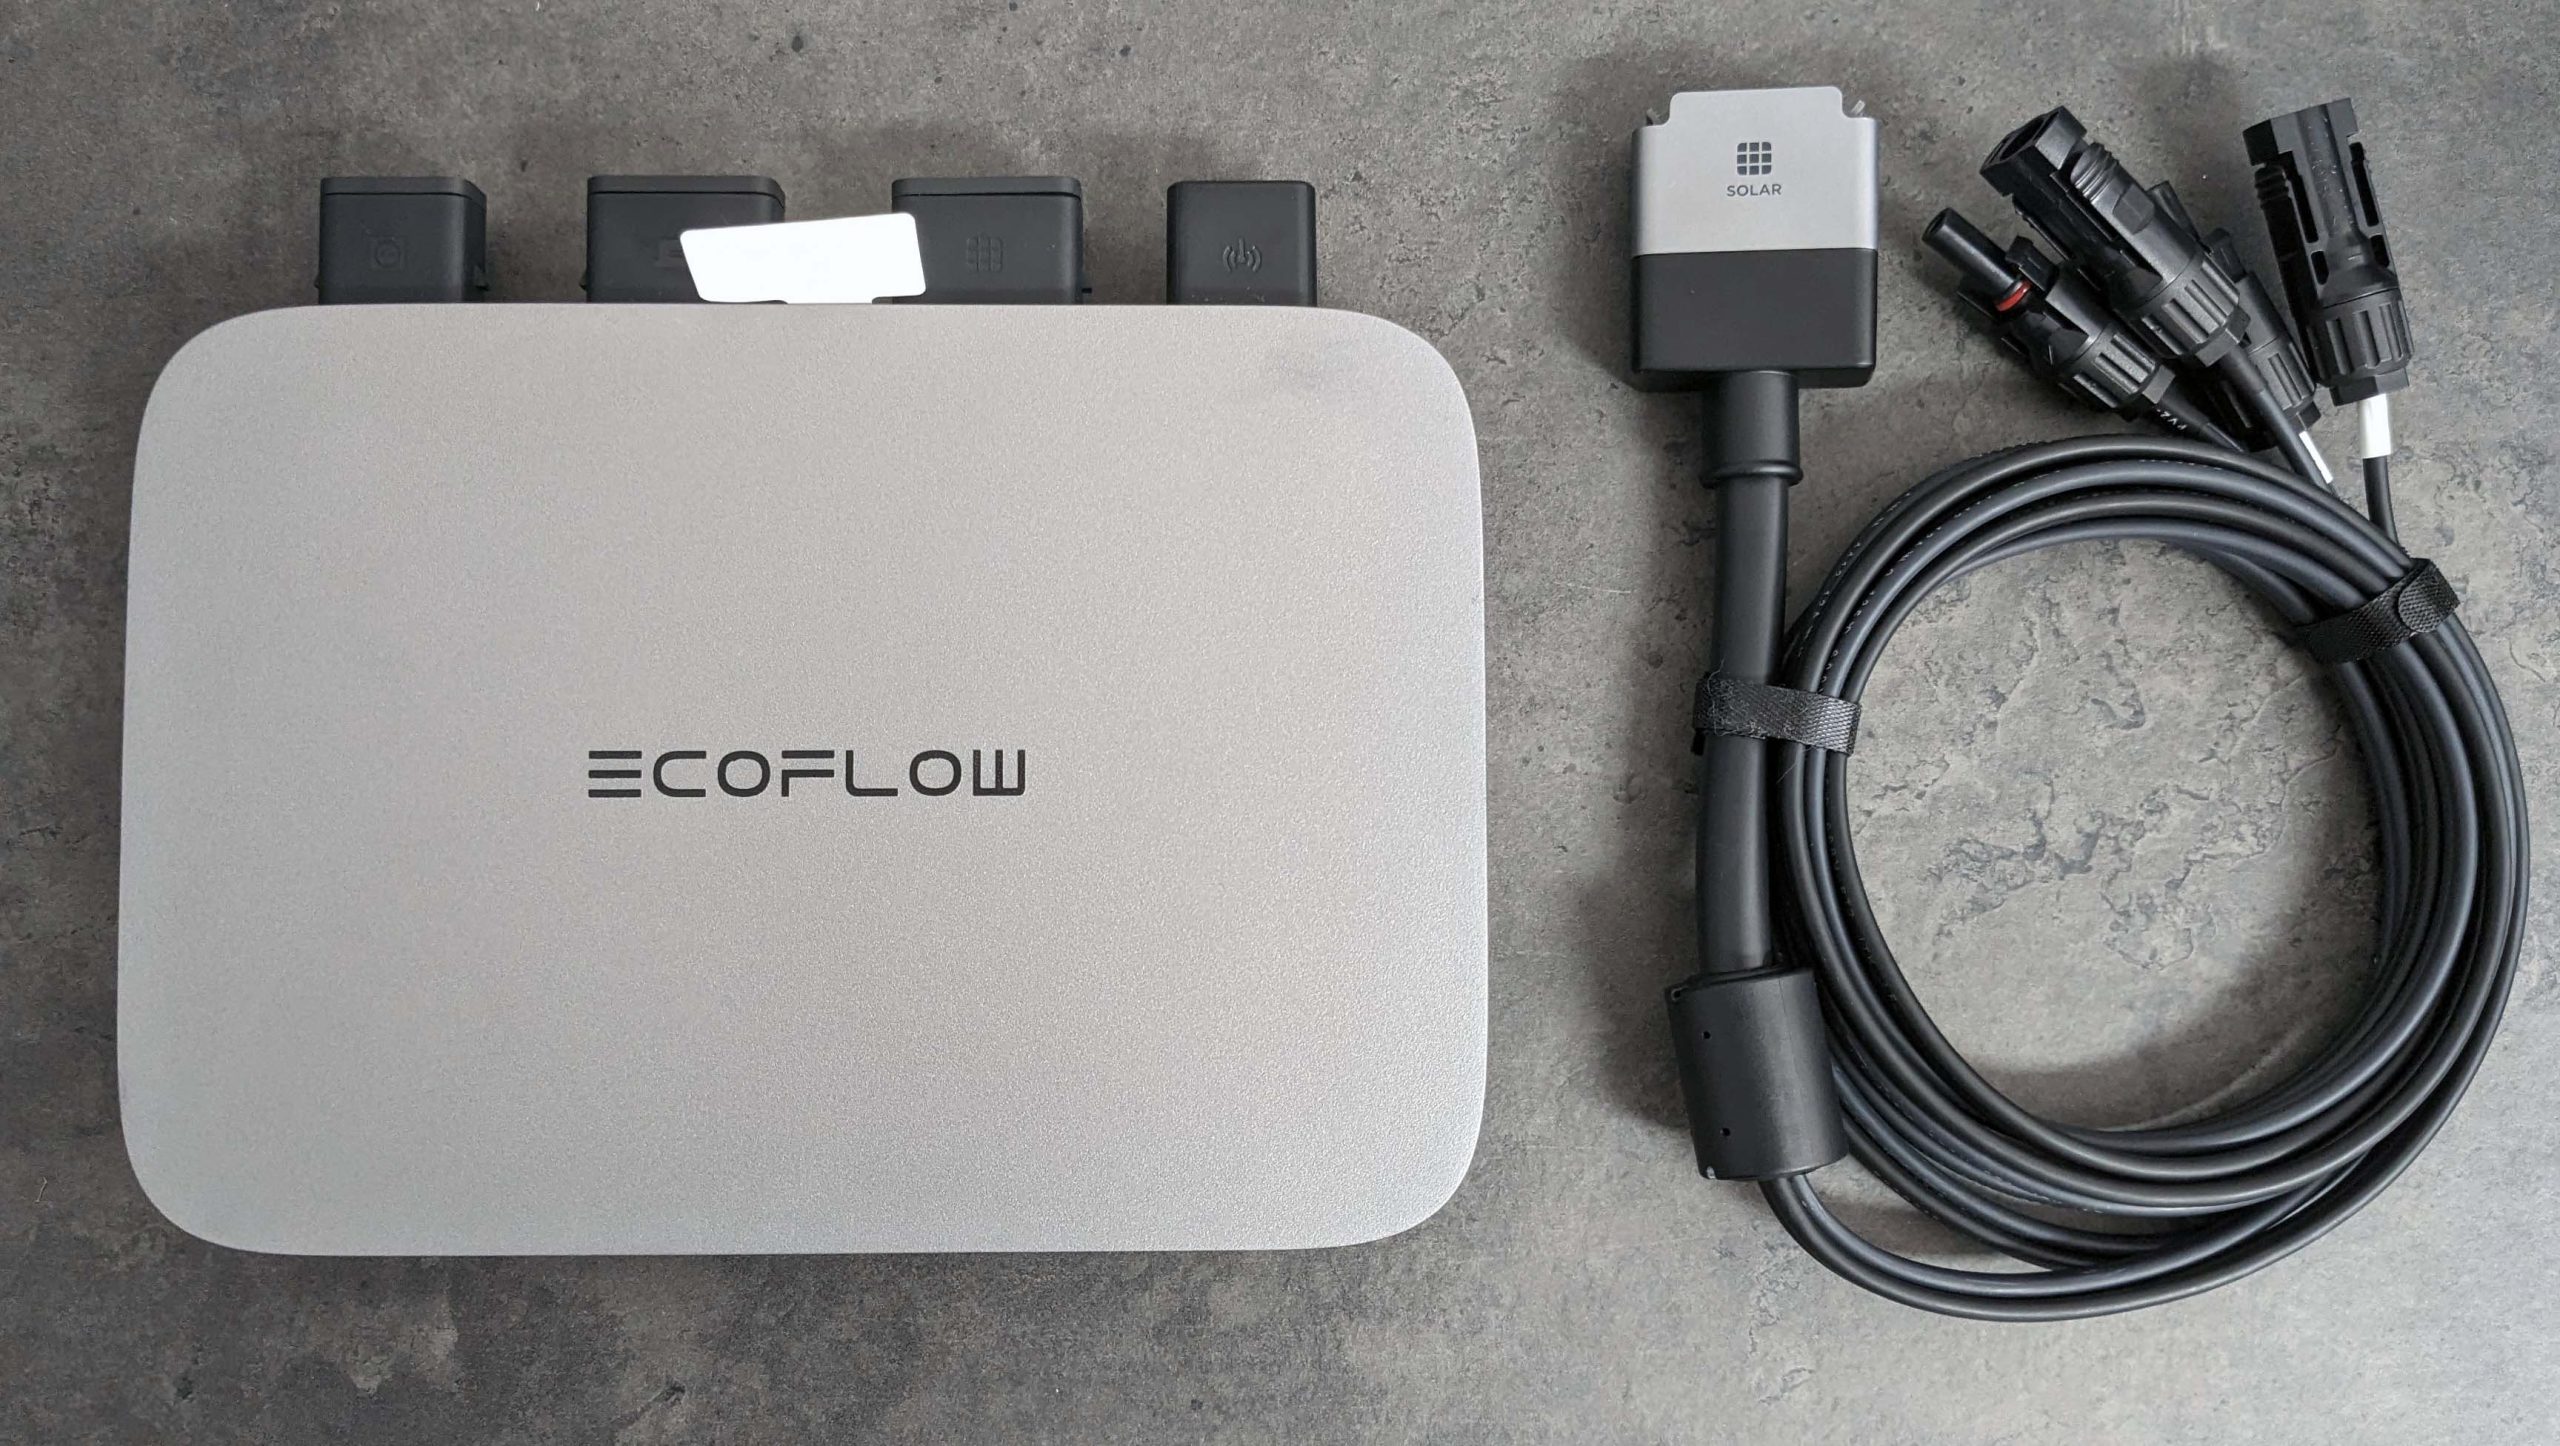 EcoFlow PowerStream inverter and Delta 2 Max Powerstation Review